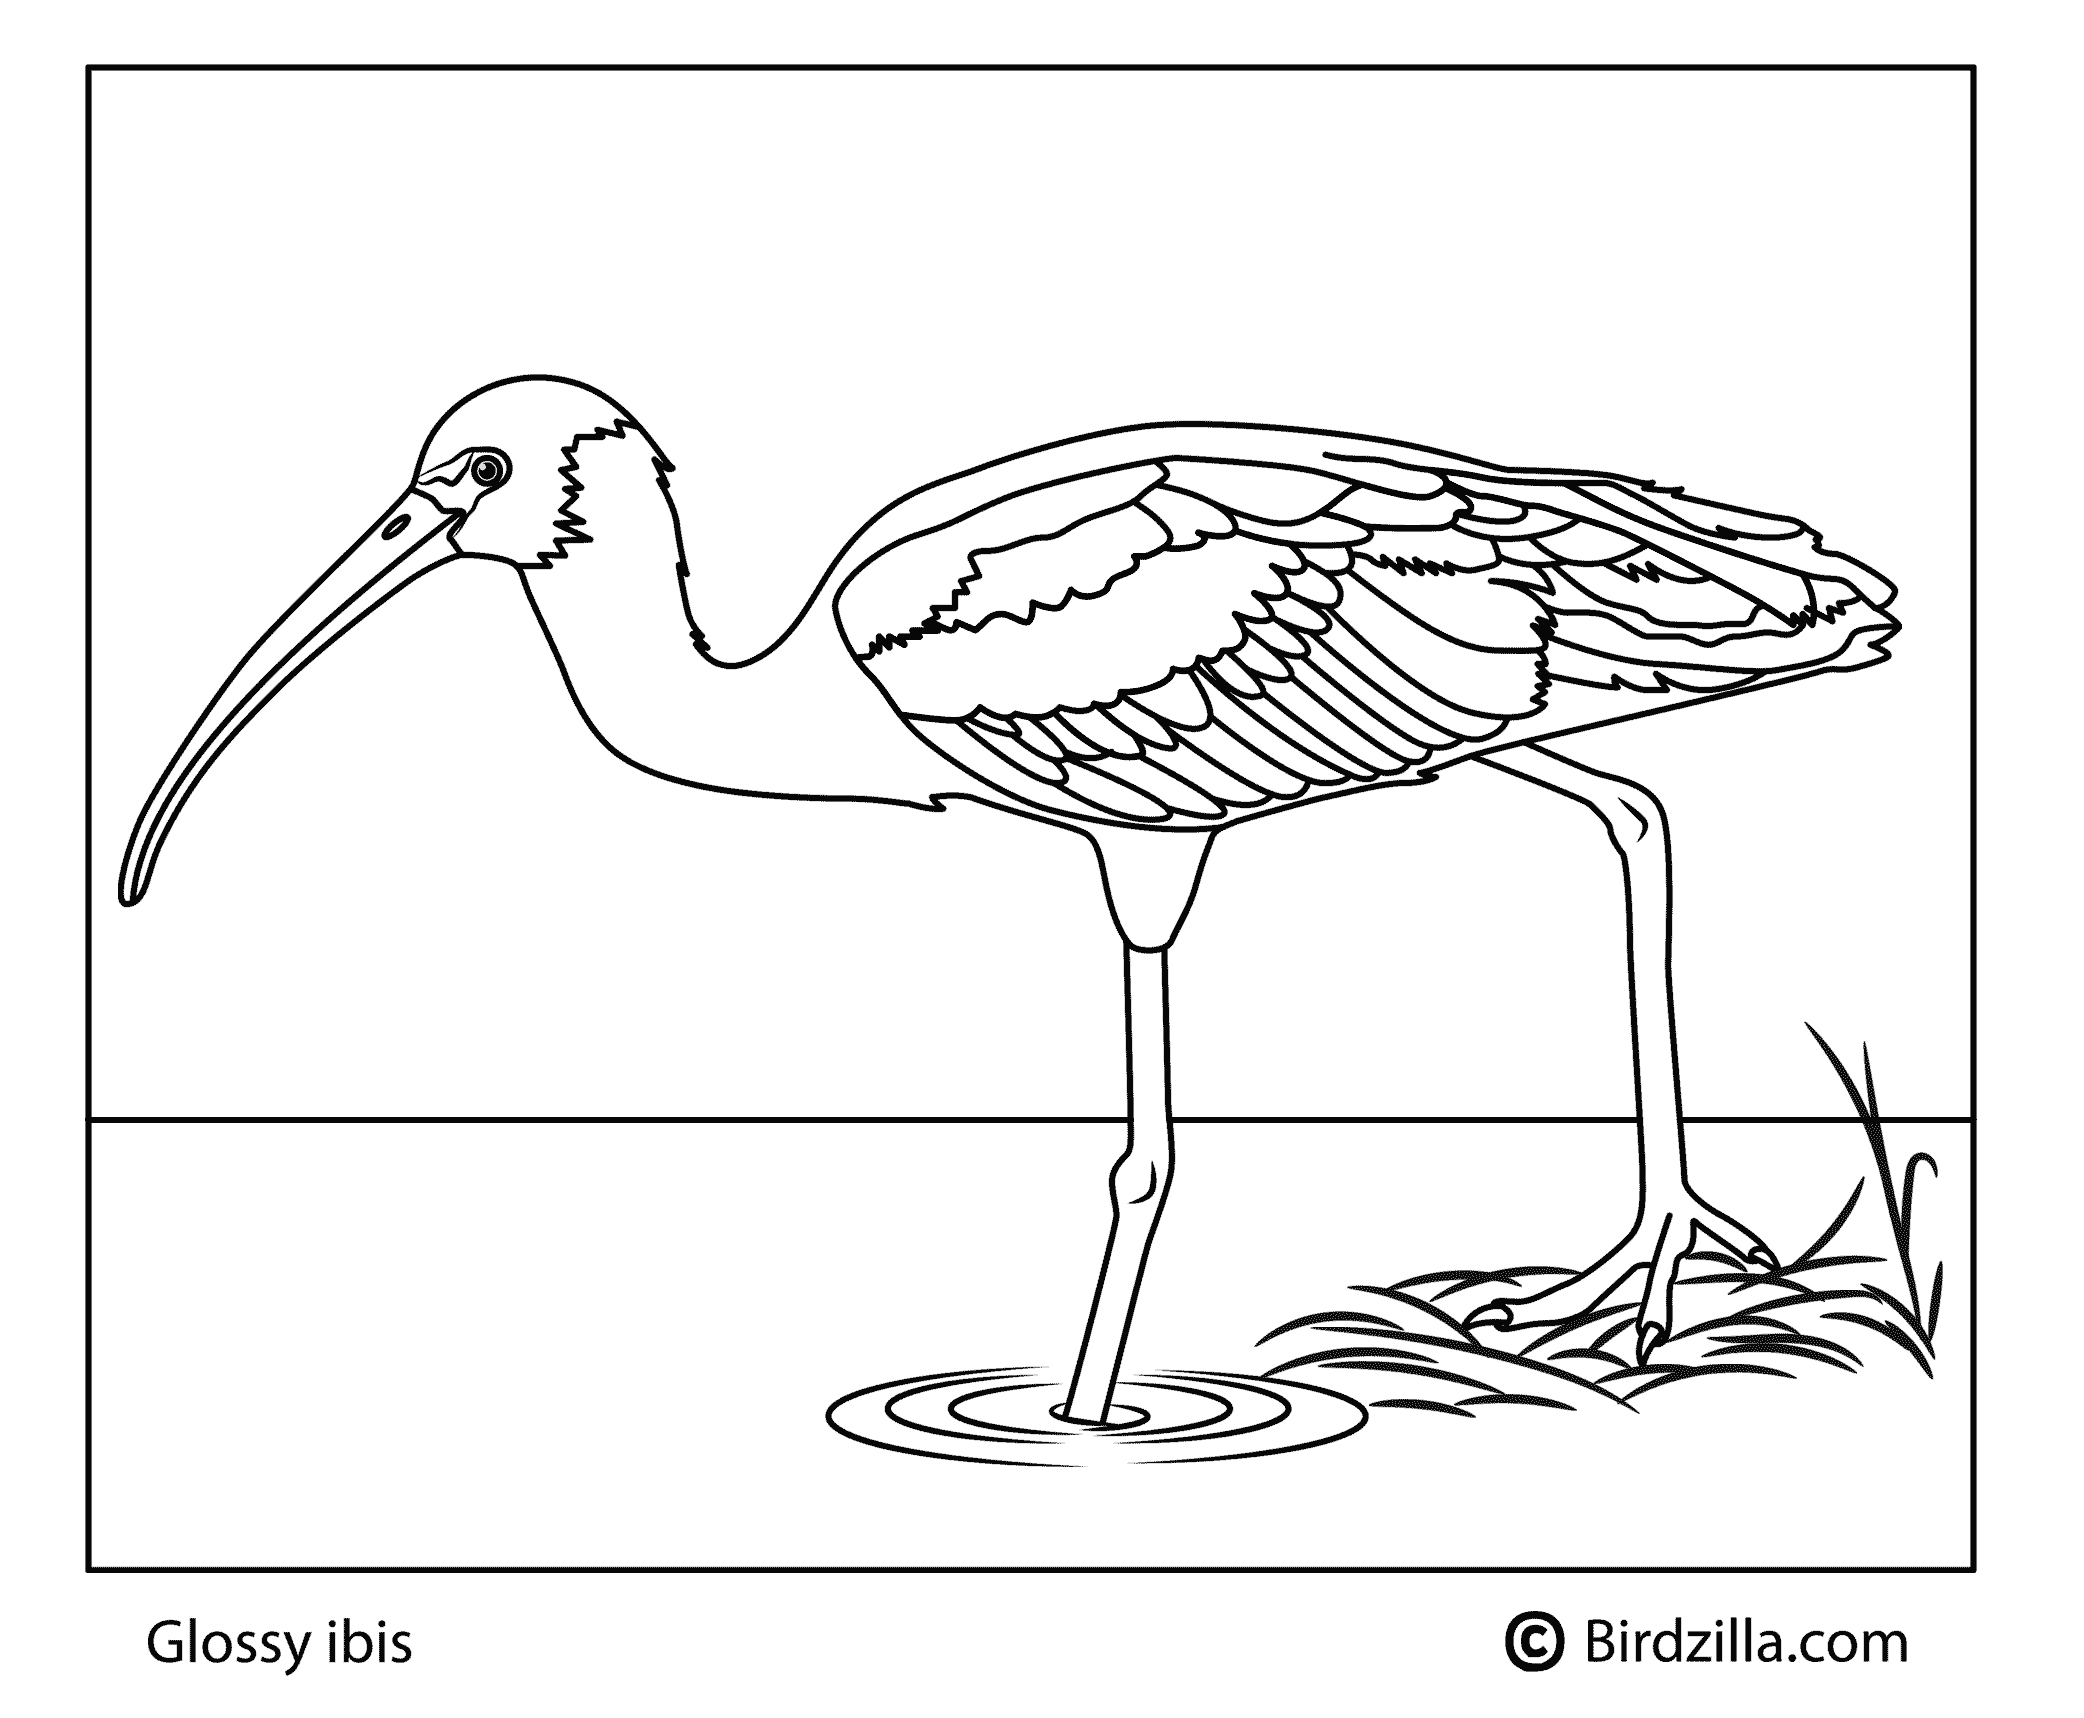 Glossy Ibis coloring page